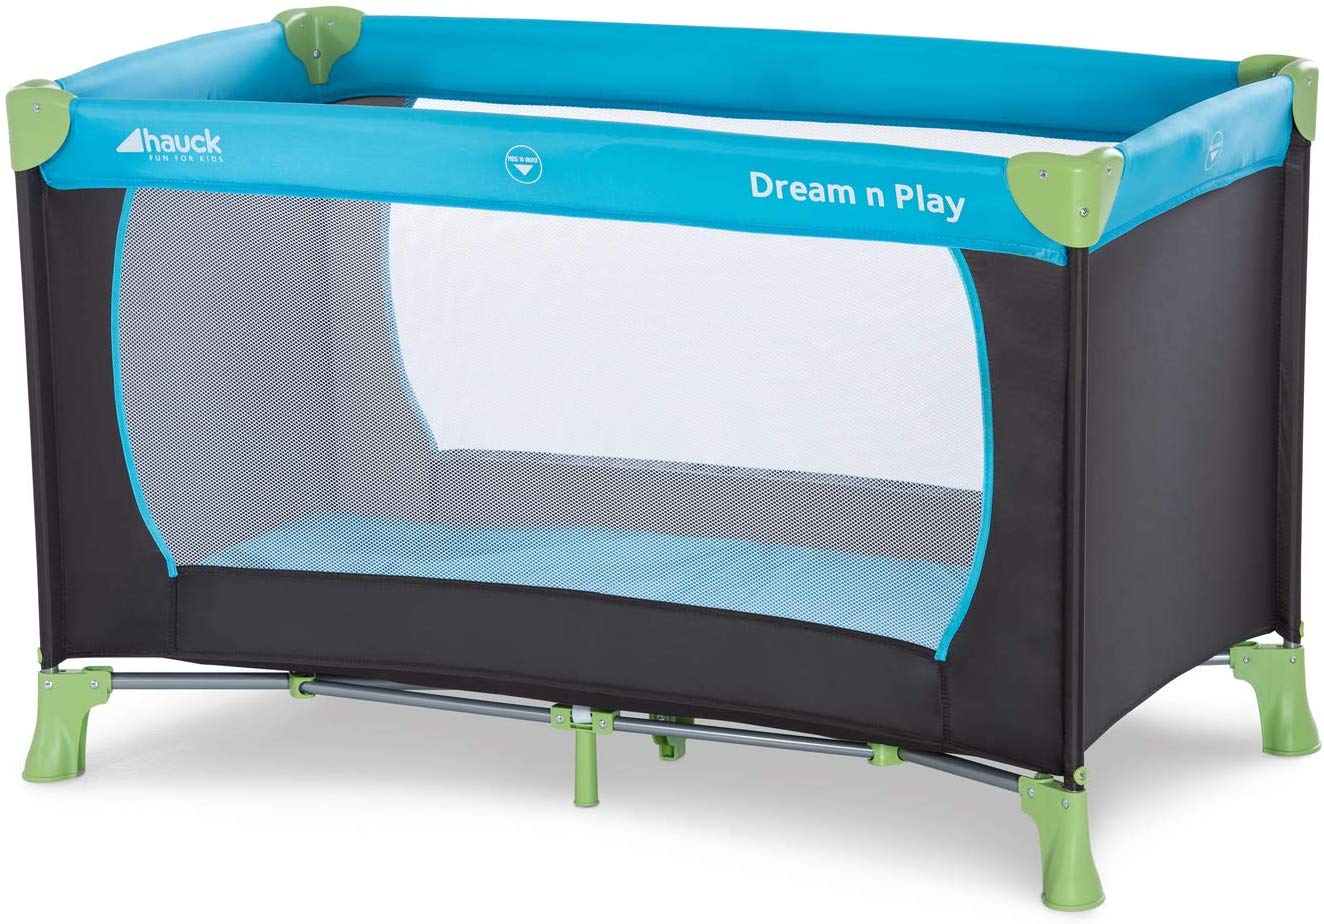 Angelcare OEM ODM Hauck Dream??n Play, Travel Cot 120 x 60 cm from Birth to 15 kg, 3-Part Travel Bed with Folding Mattress and Carry Bag, Tilt-Resistant, Waterblue